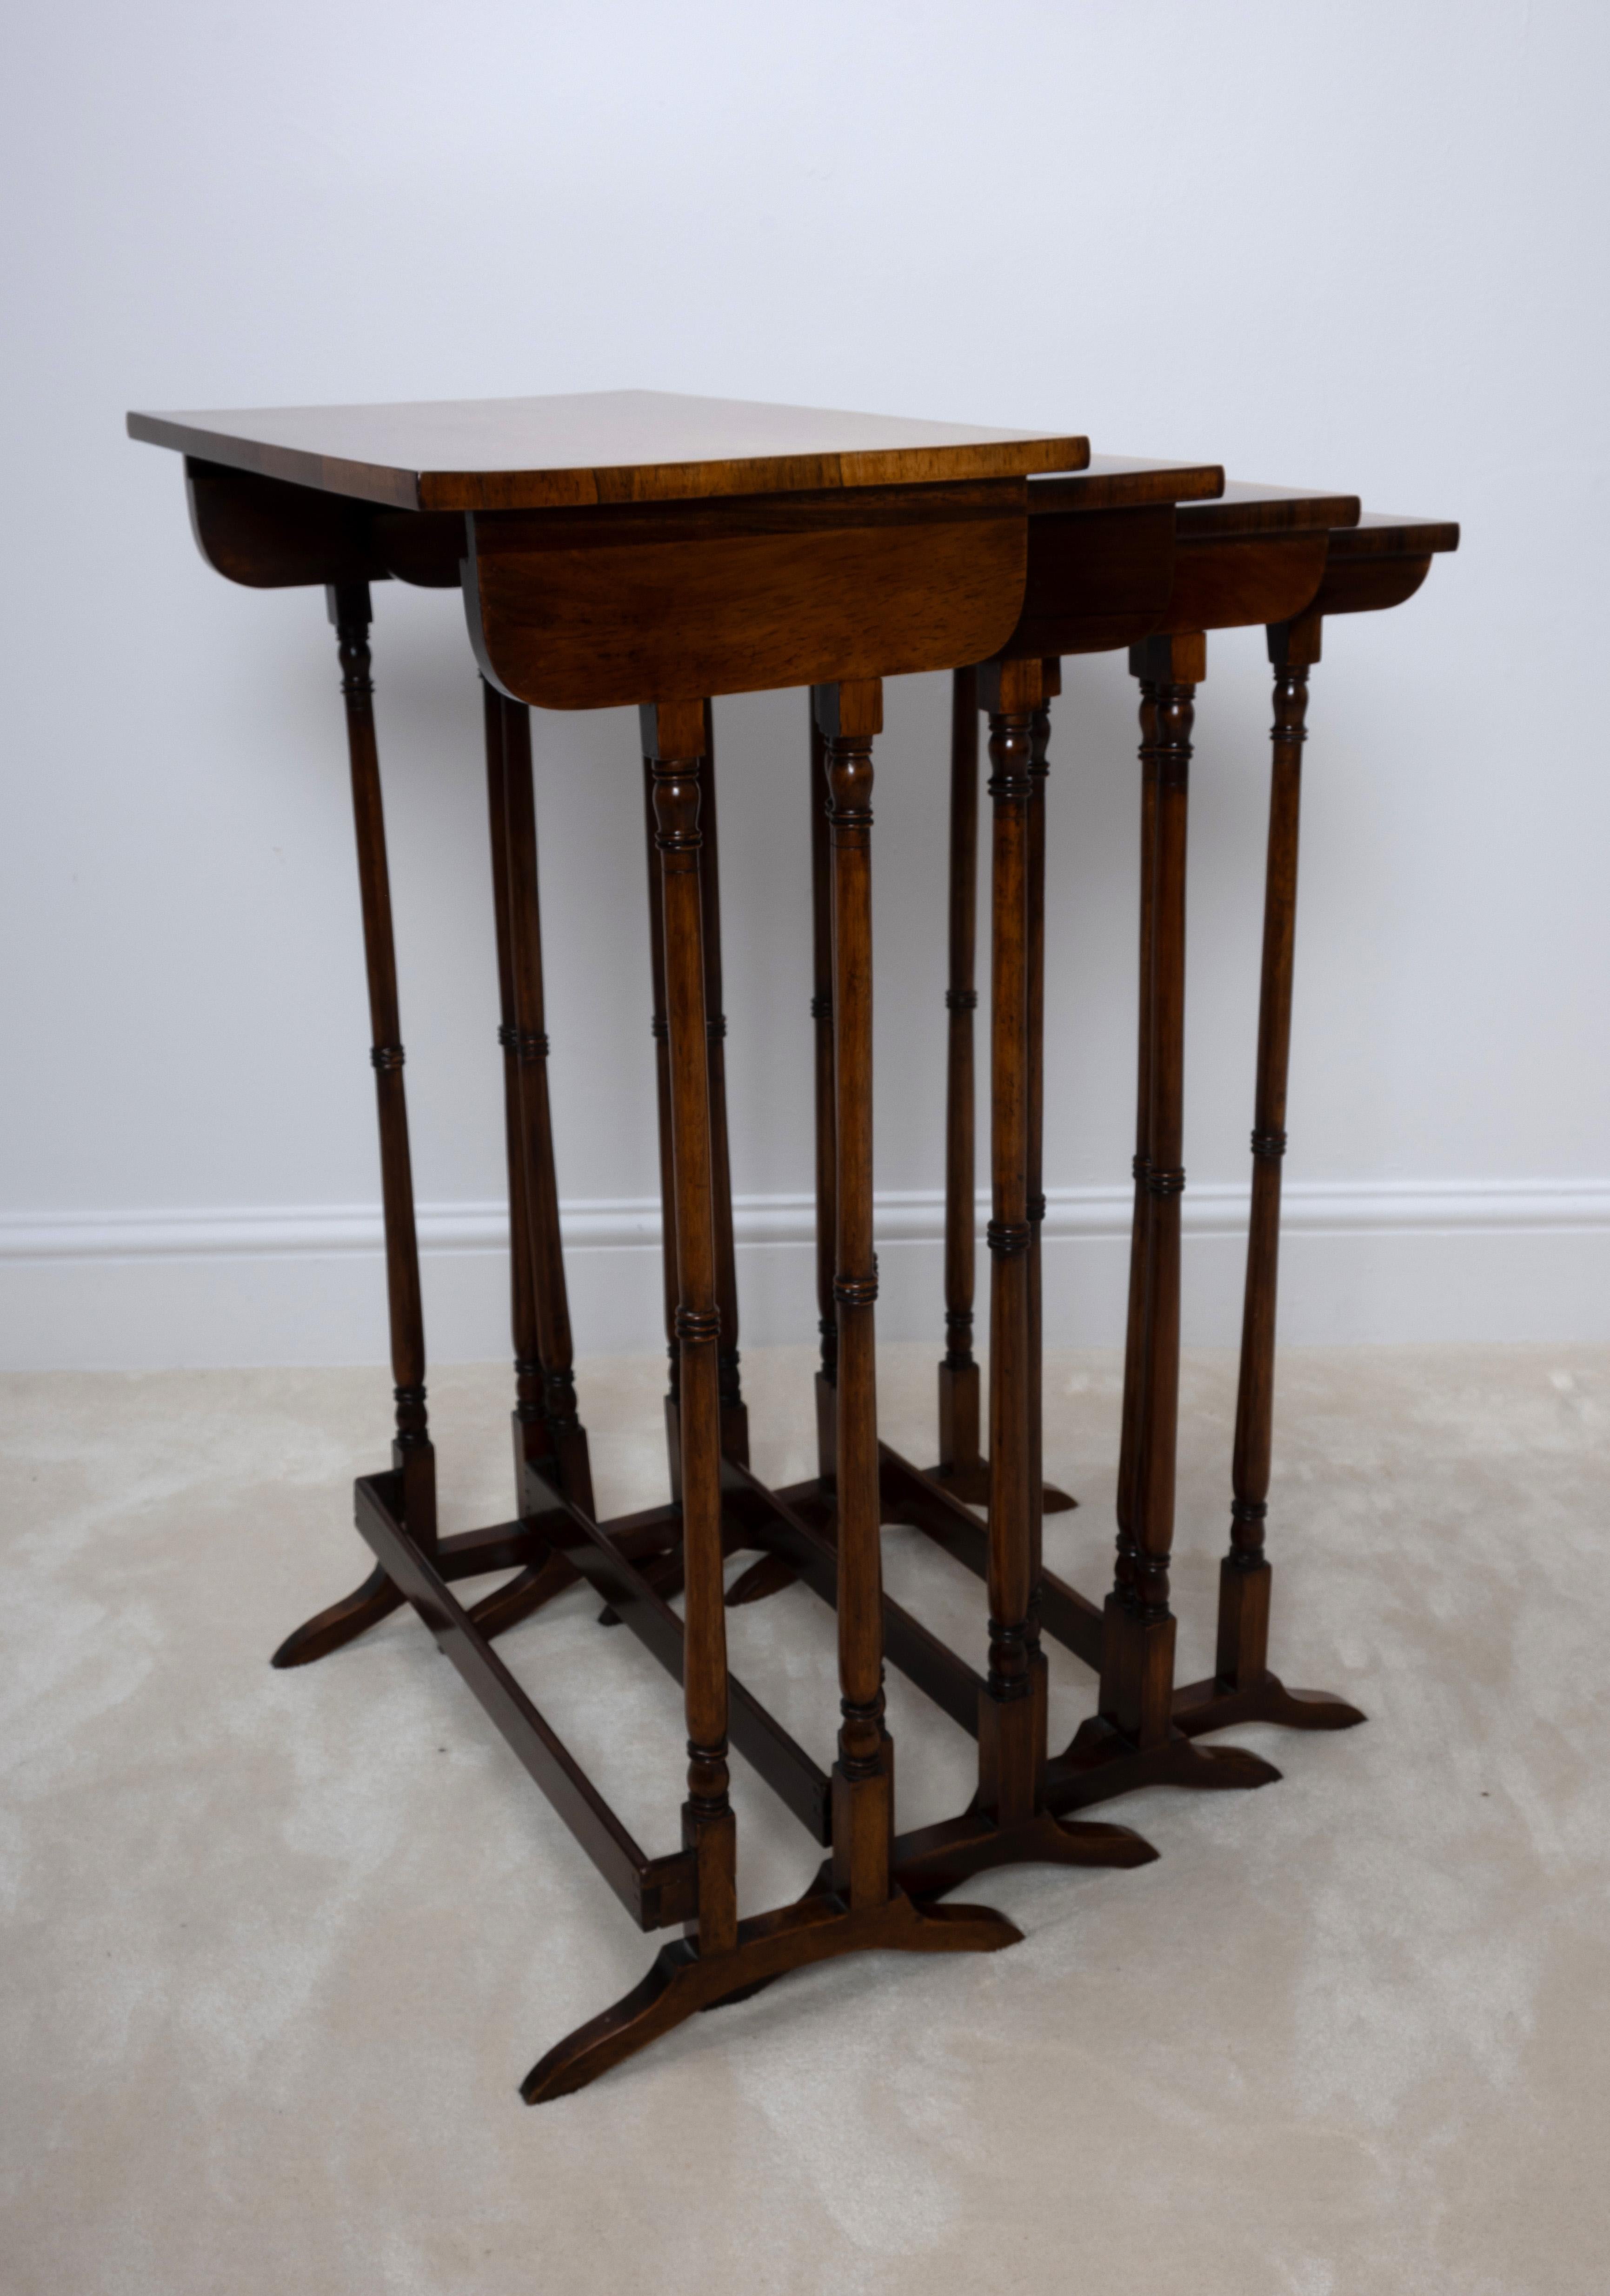 Antique English Regency Revival Rosewood Quartetto Of Nesting Table C.1820 In Good Condition For Sale In London, GB